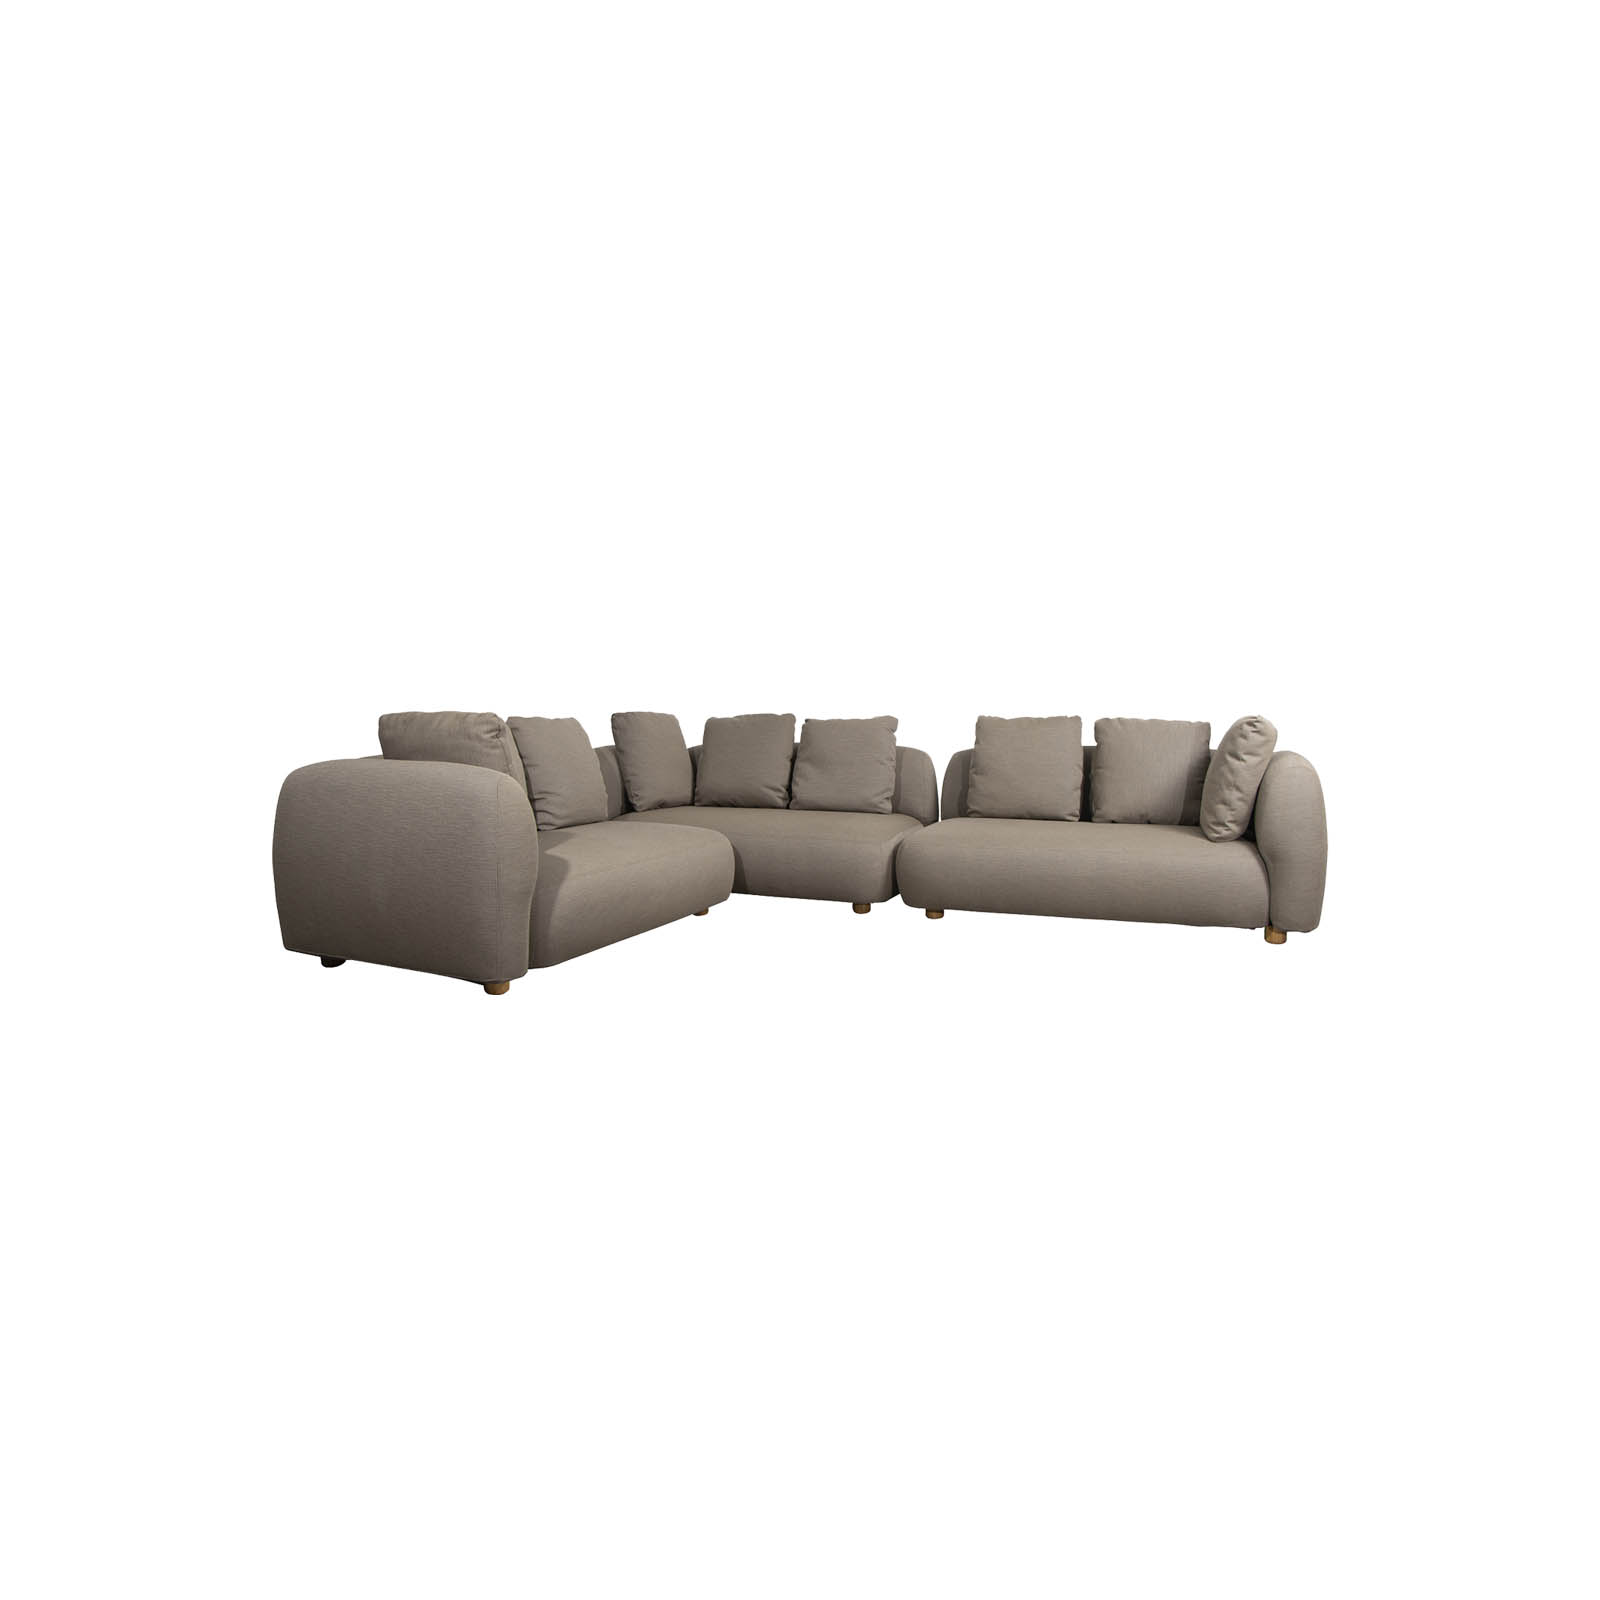 Capture Ecksofa 1 aus Cane-line AirTouch in Taupe